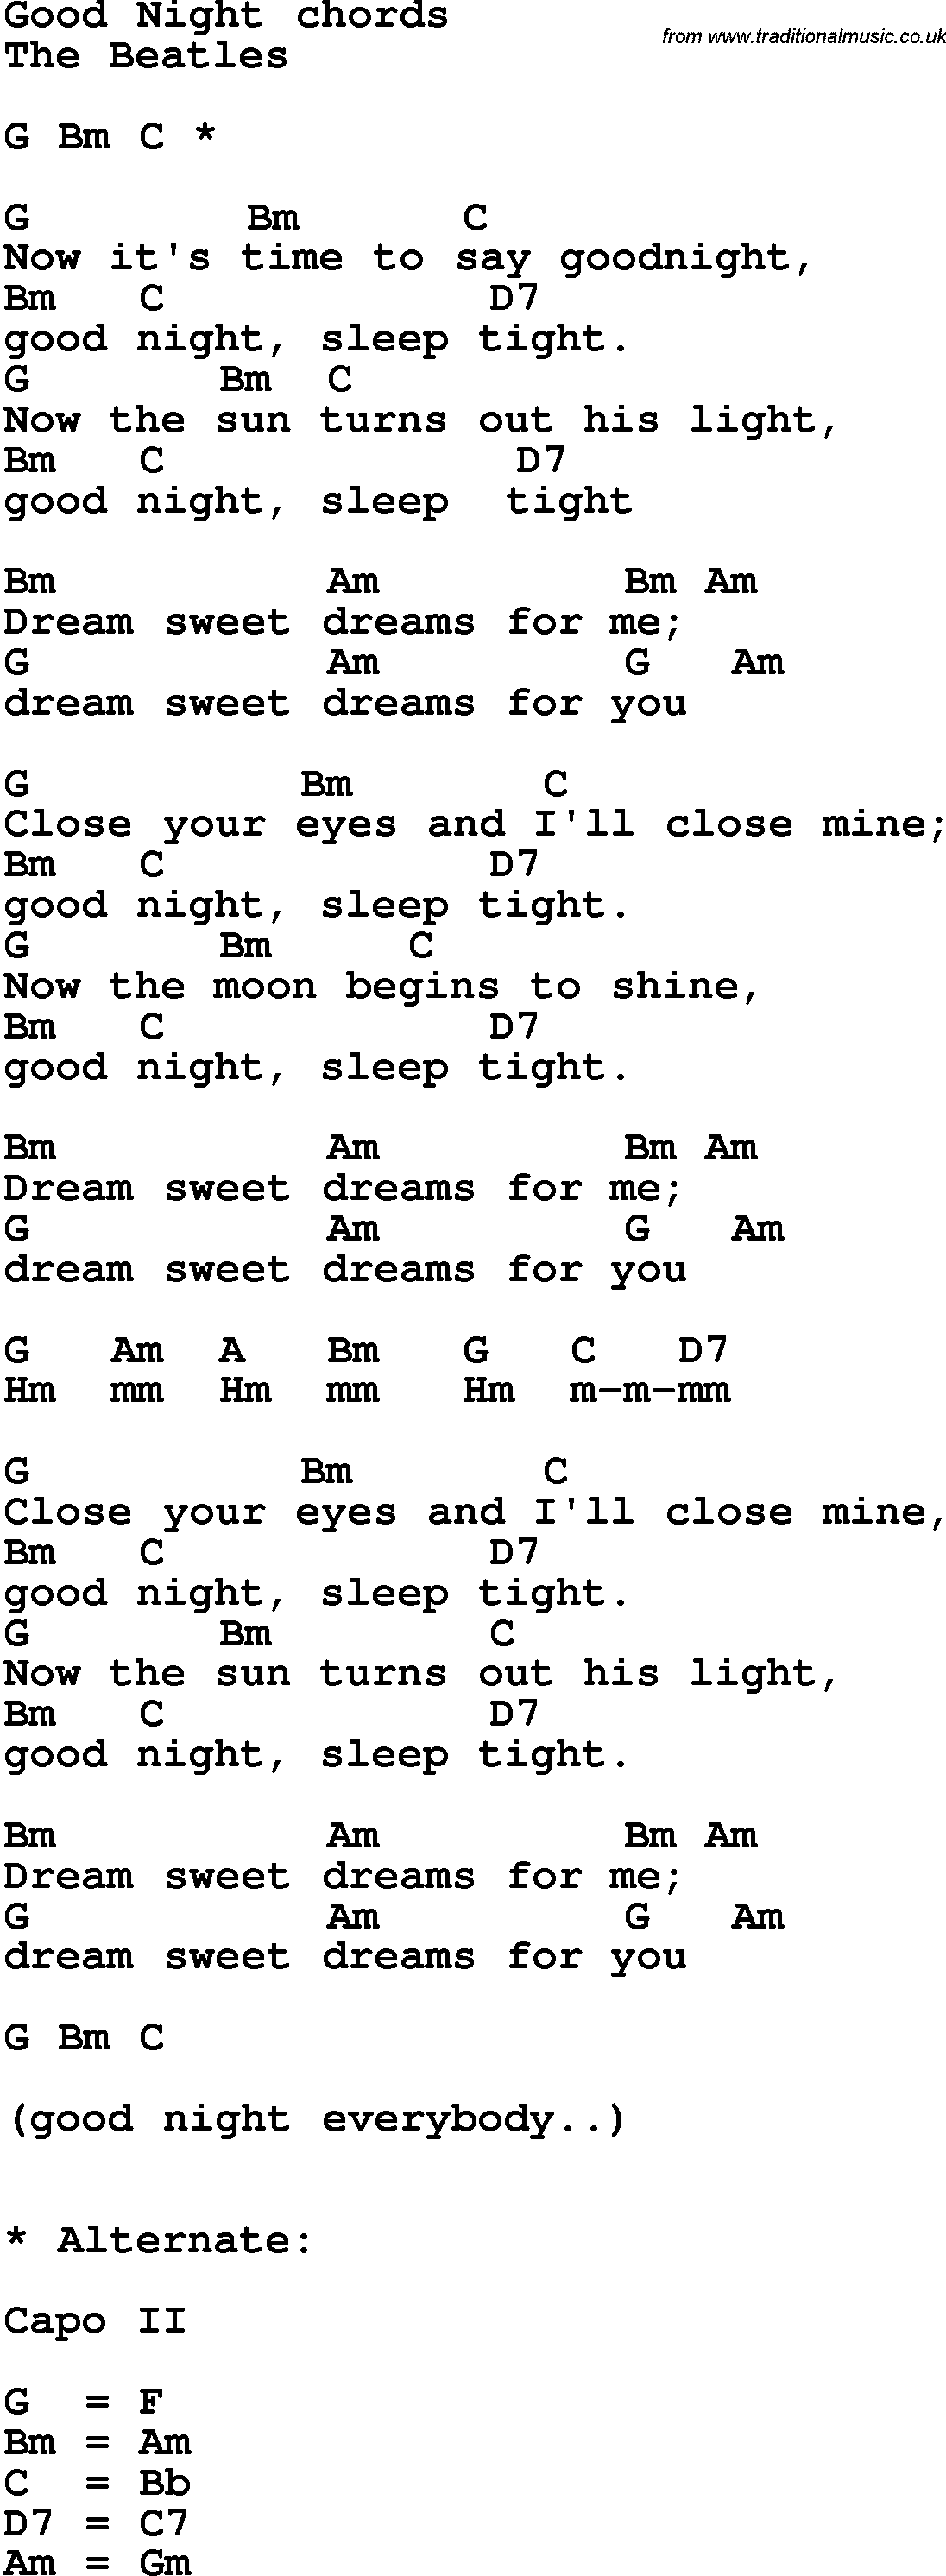 Song Lyrics with guitar chords for Good Night - The Beatles